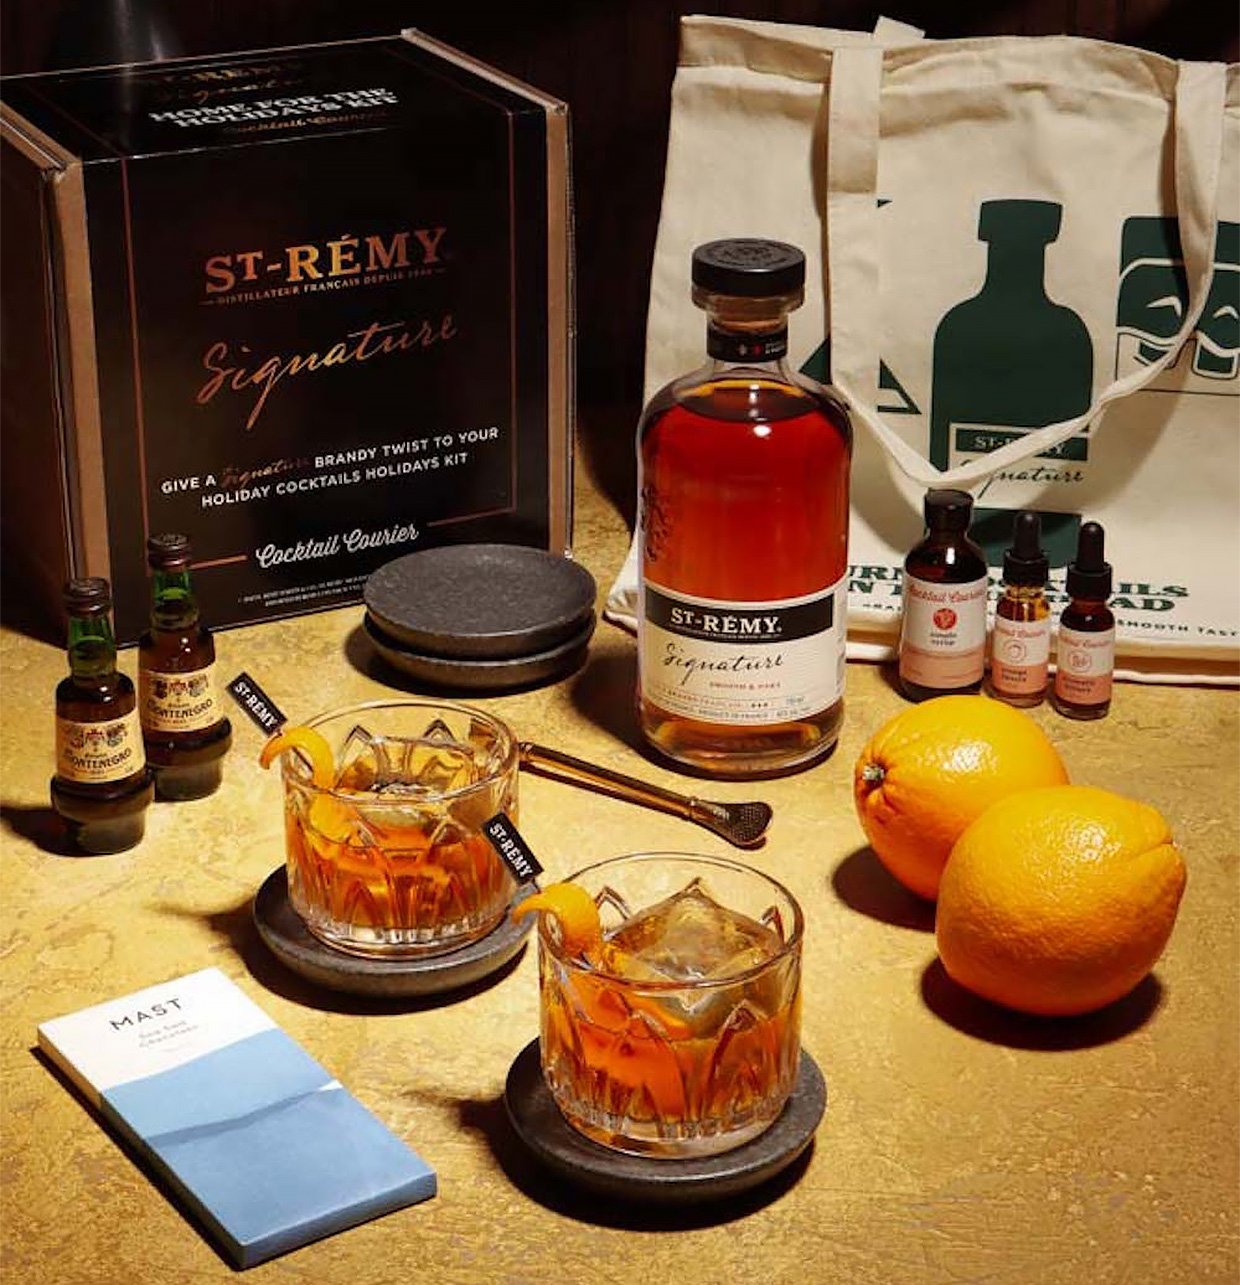 St-Rémy Signature Home for The Holidays Cocktail Kit